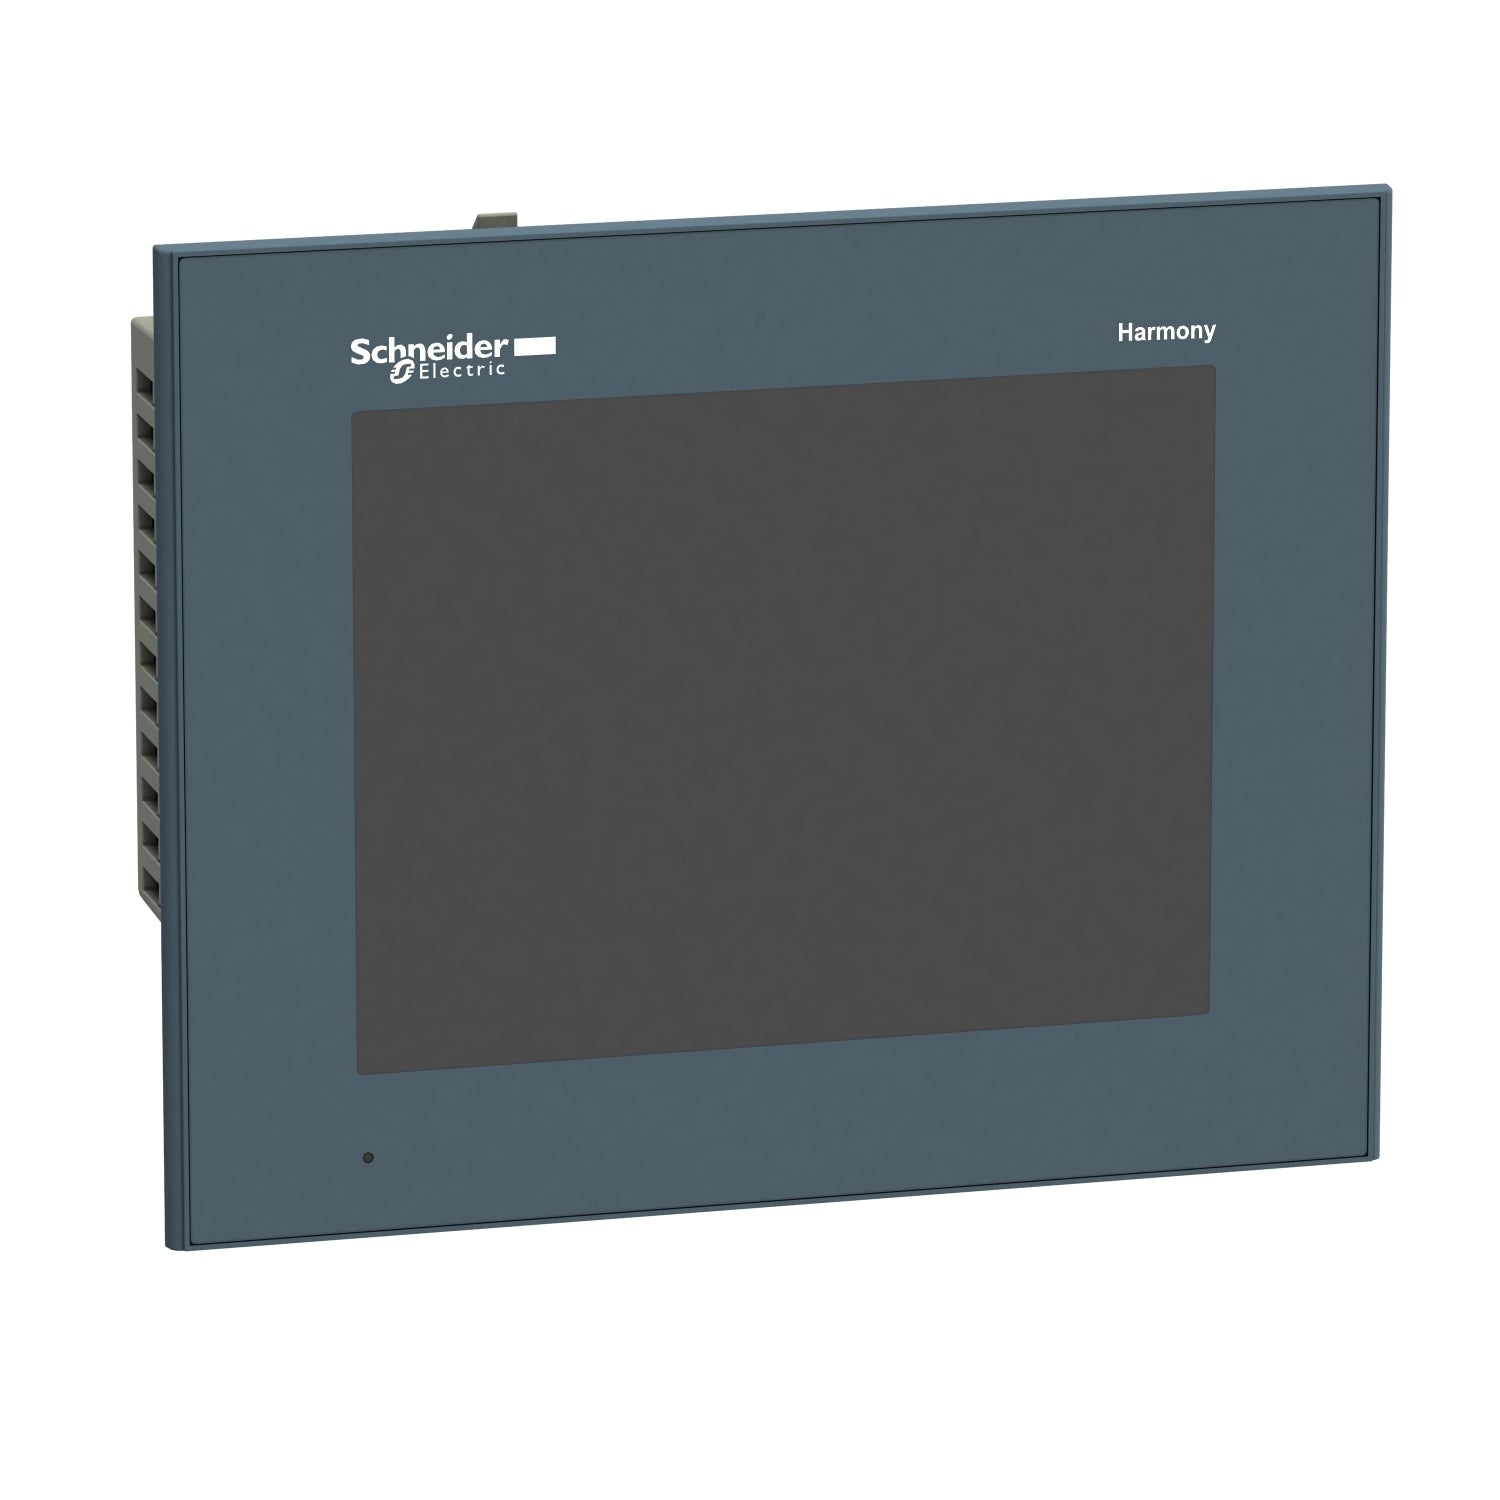 HMIGTO4310 | Schneider Electric Advanced touchscreen panel